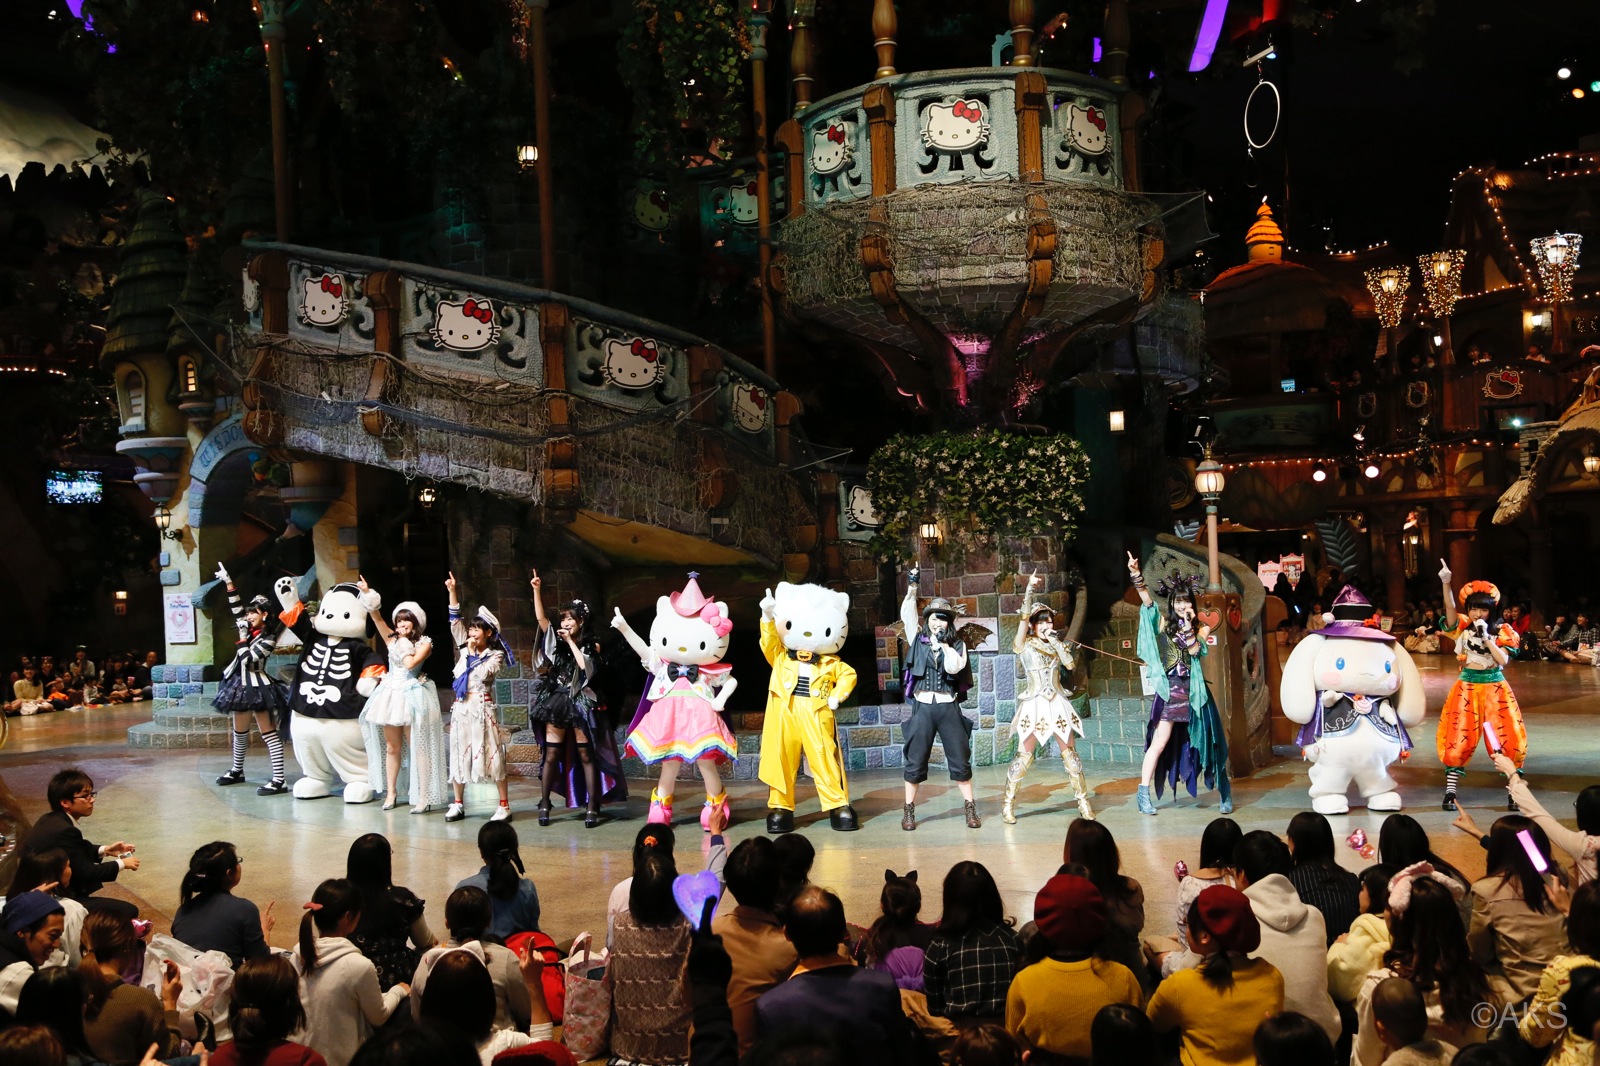 FANTASY WORLD! AKB48 Dances with Sanrio Characters at “AKB48 in Puro Halloween”